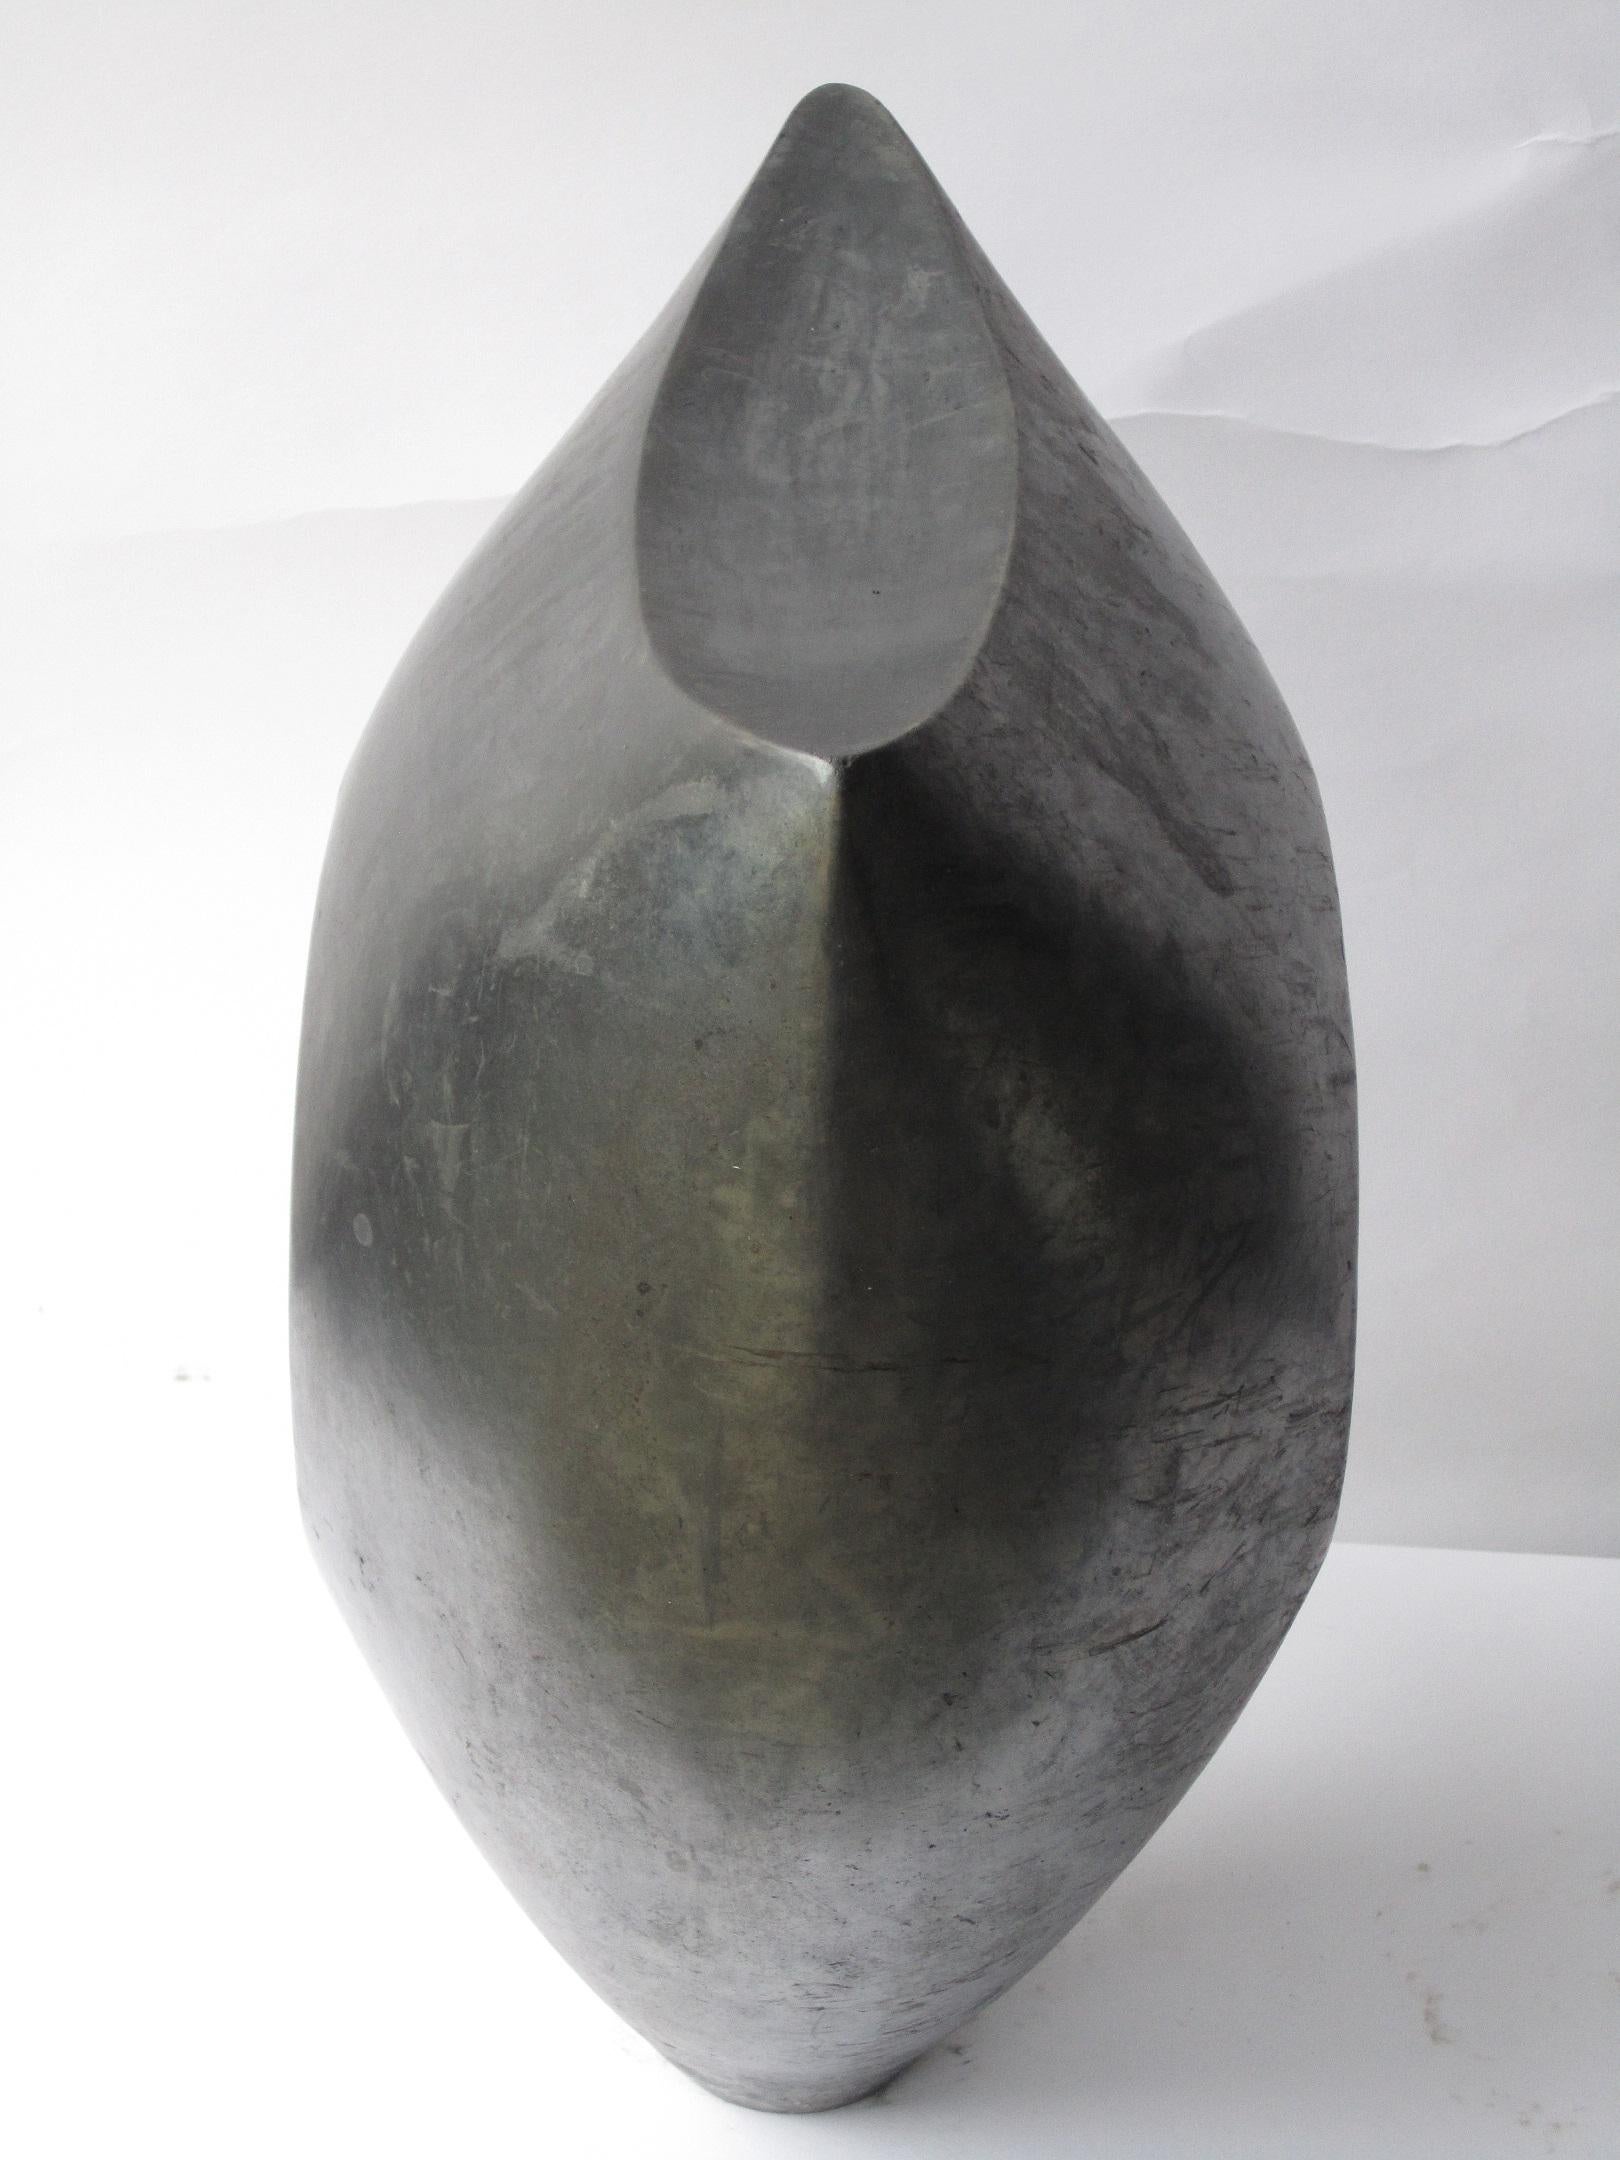 Black Sun (2019) is a one-off ceramic sculpture by contemporary artist Tien Wen whose work revolves around the idea of abstraction and the pureness of shapes. Thanks to the raku technique, dear to the artist, the sculpture takes on a metallic tint